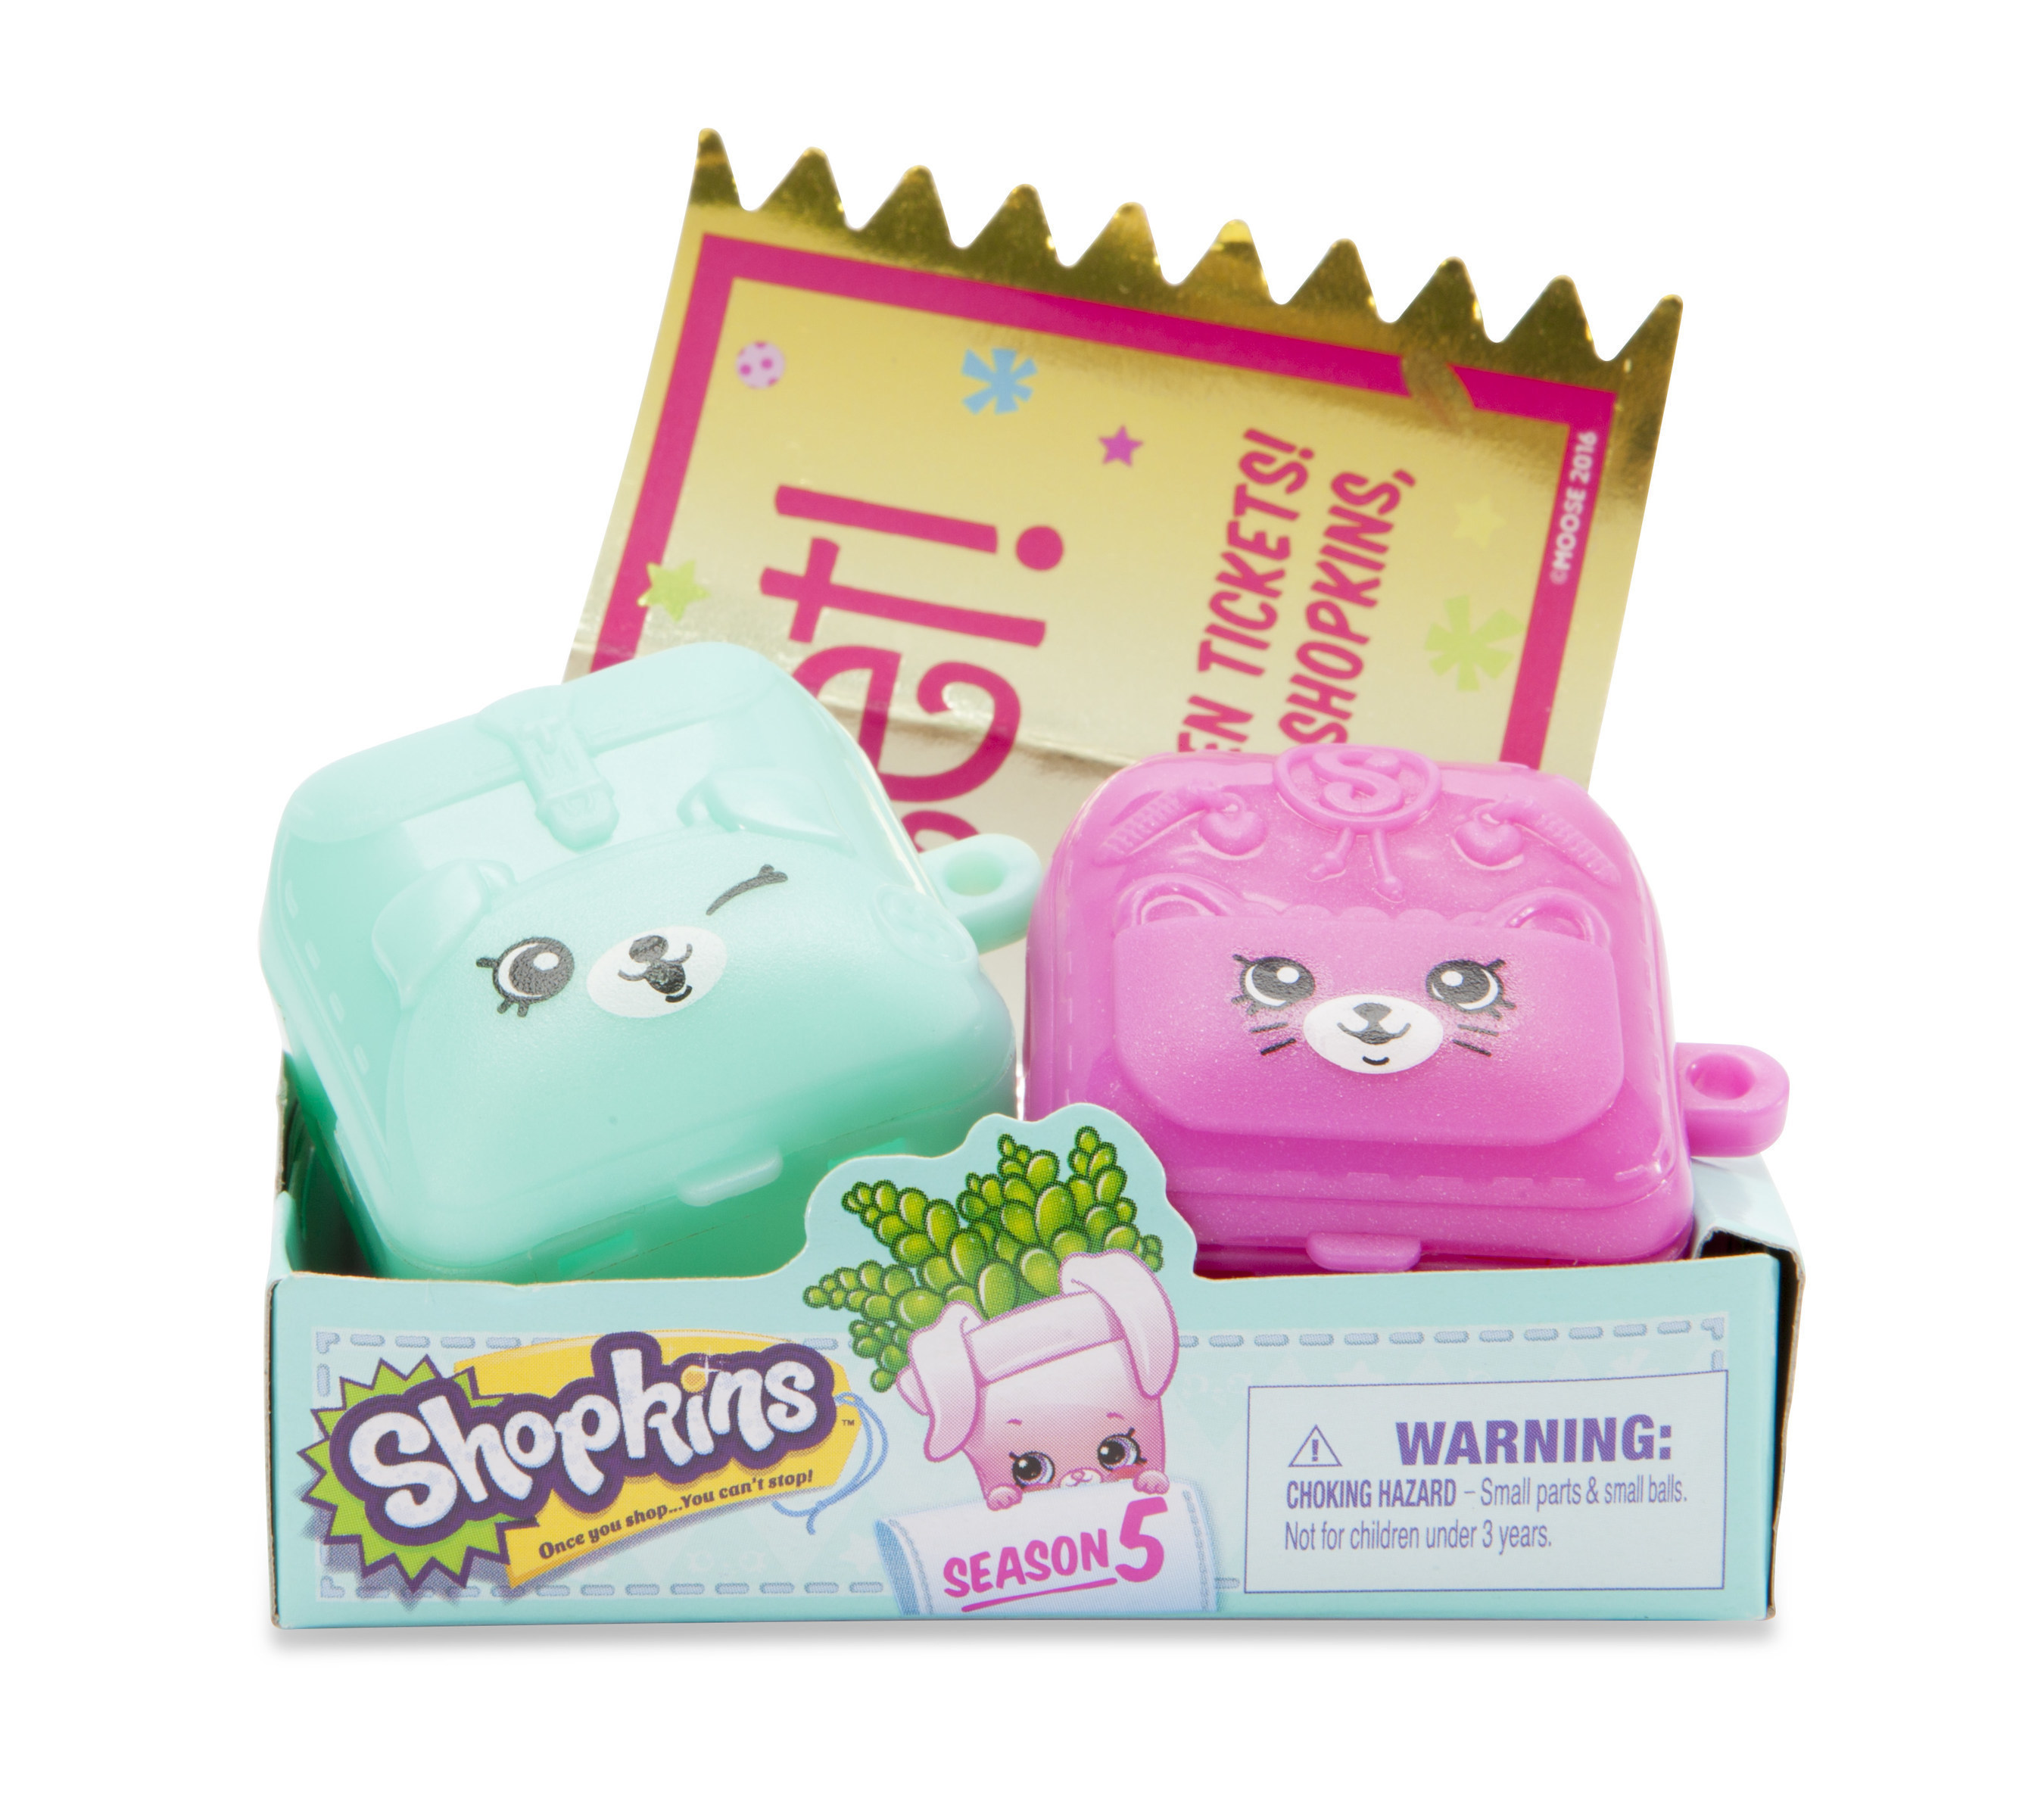 Moose Toys announces its first-ever Shopkins Golden Ticket Hunt, launching a nationwide treasure hunt to celebrate Shopkins fans and the fifth season of America's favorite tiny toy.